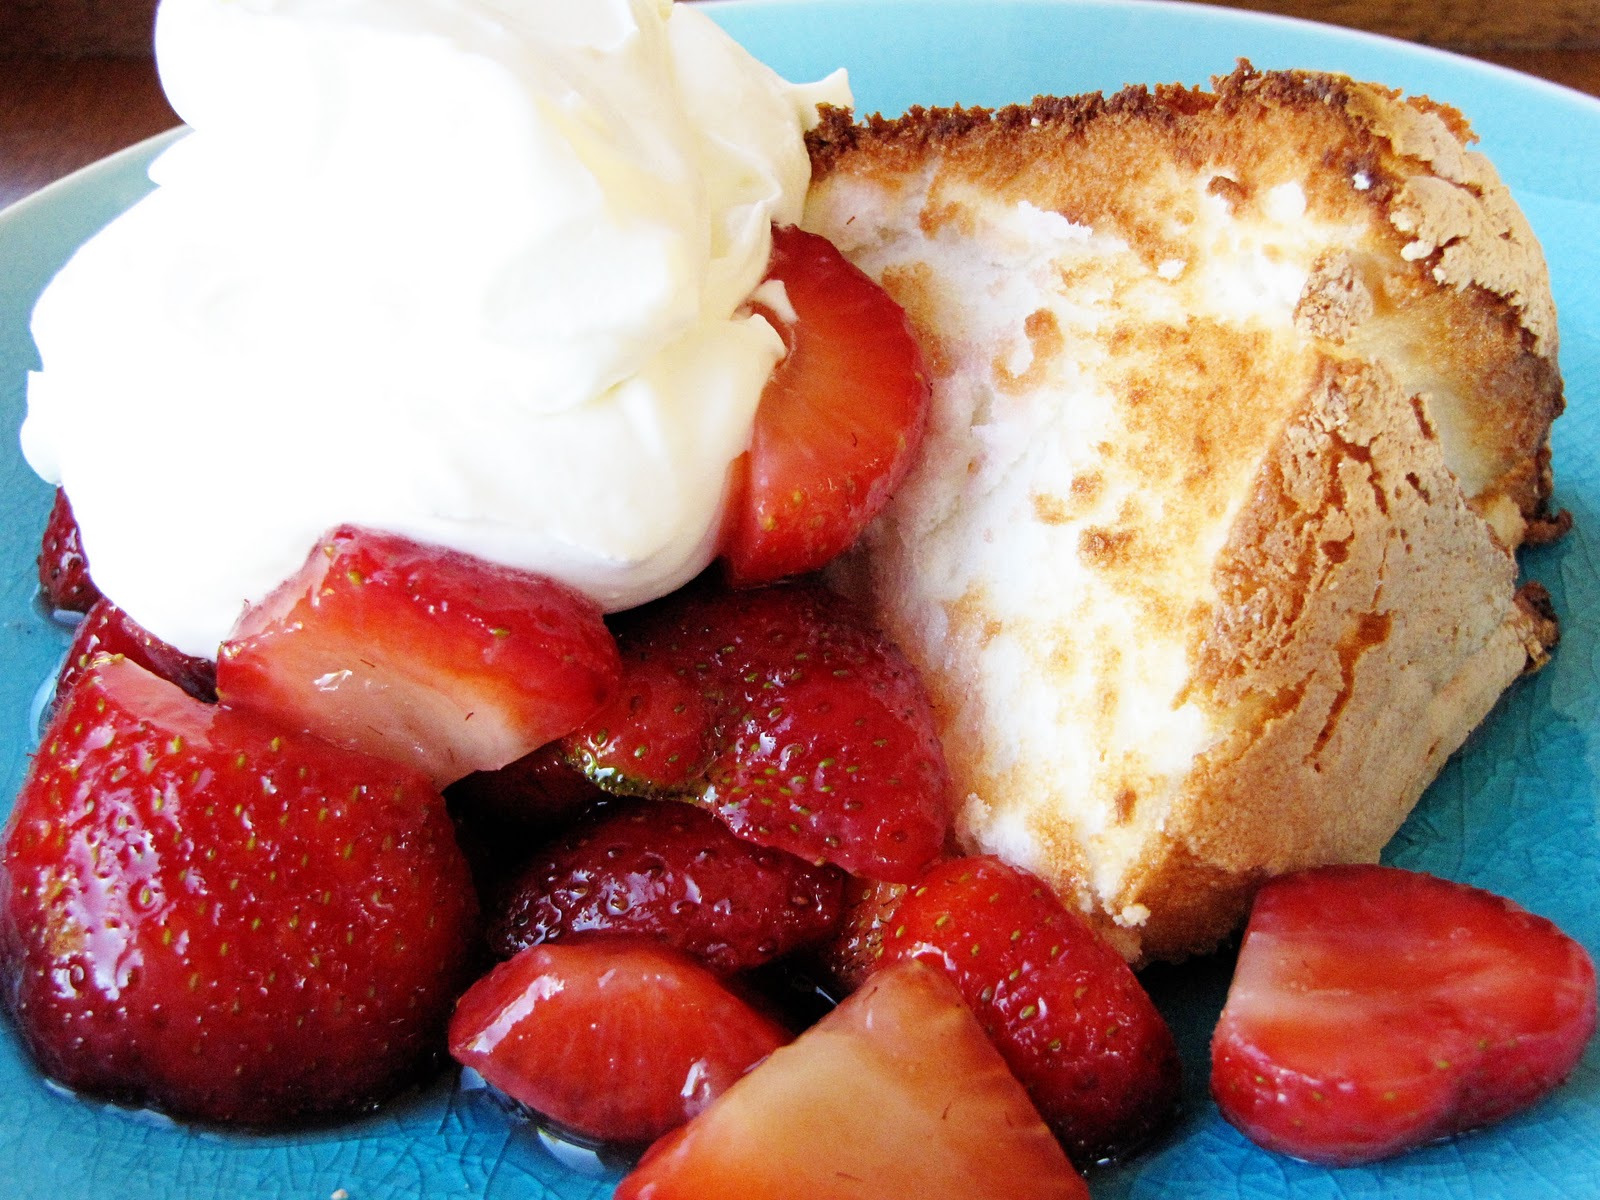 It's pretty much a deconstructed Strawberry Shortcake if you think about it. I remember having this after dinner in the summer time, so good, ...